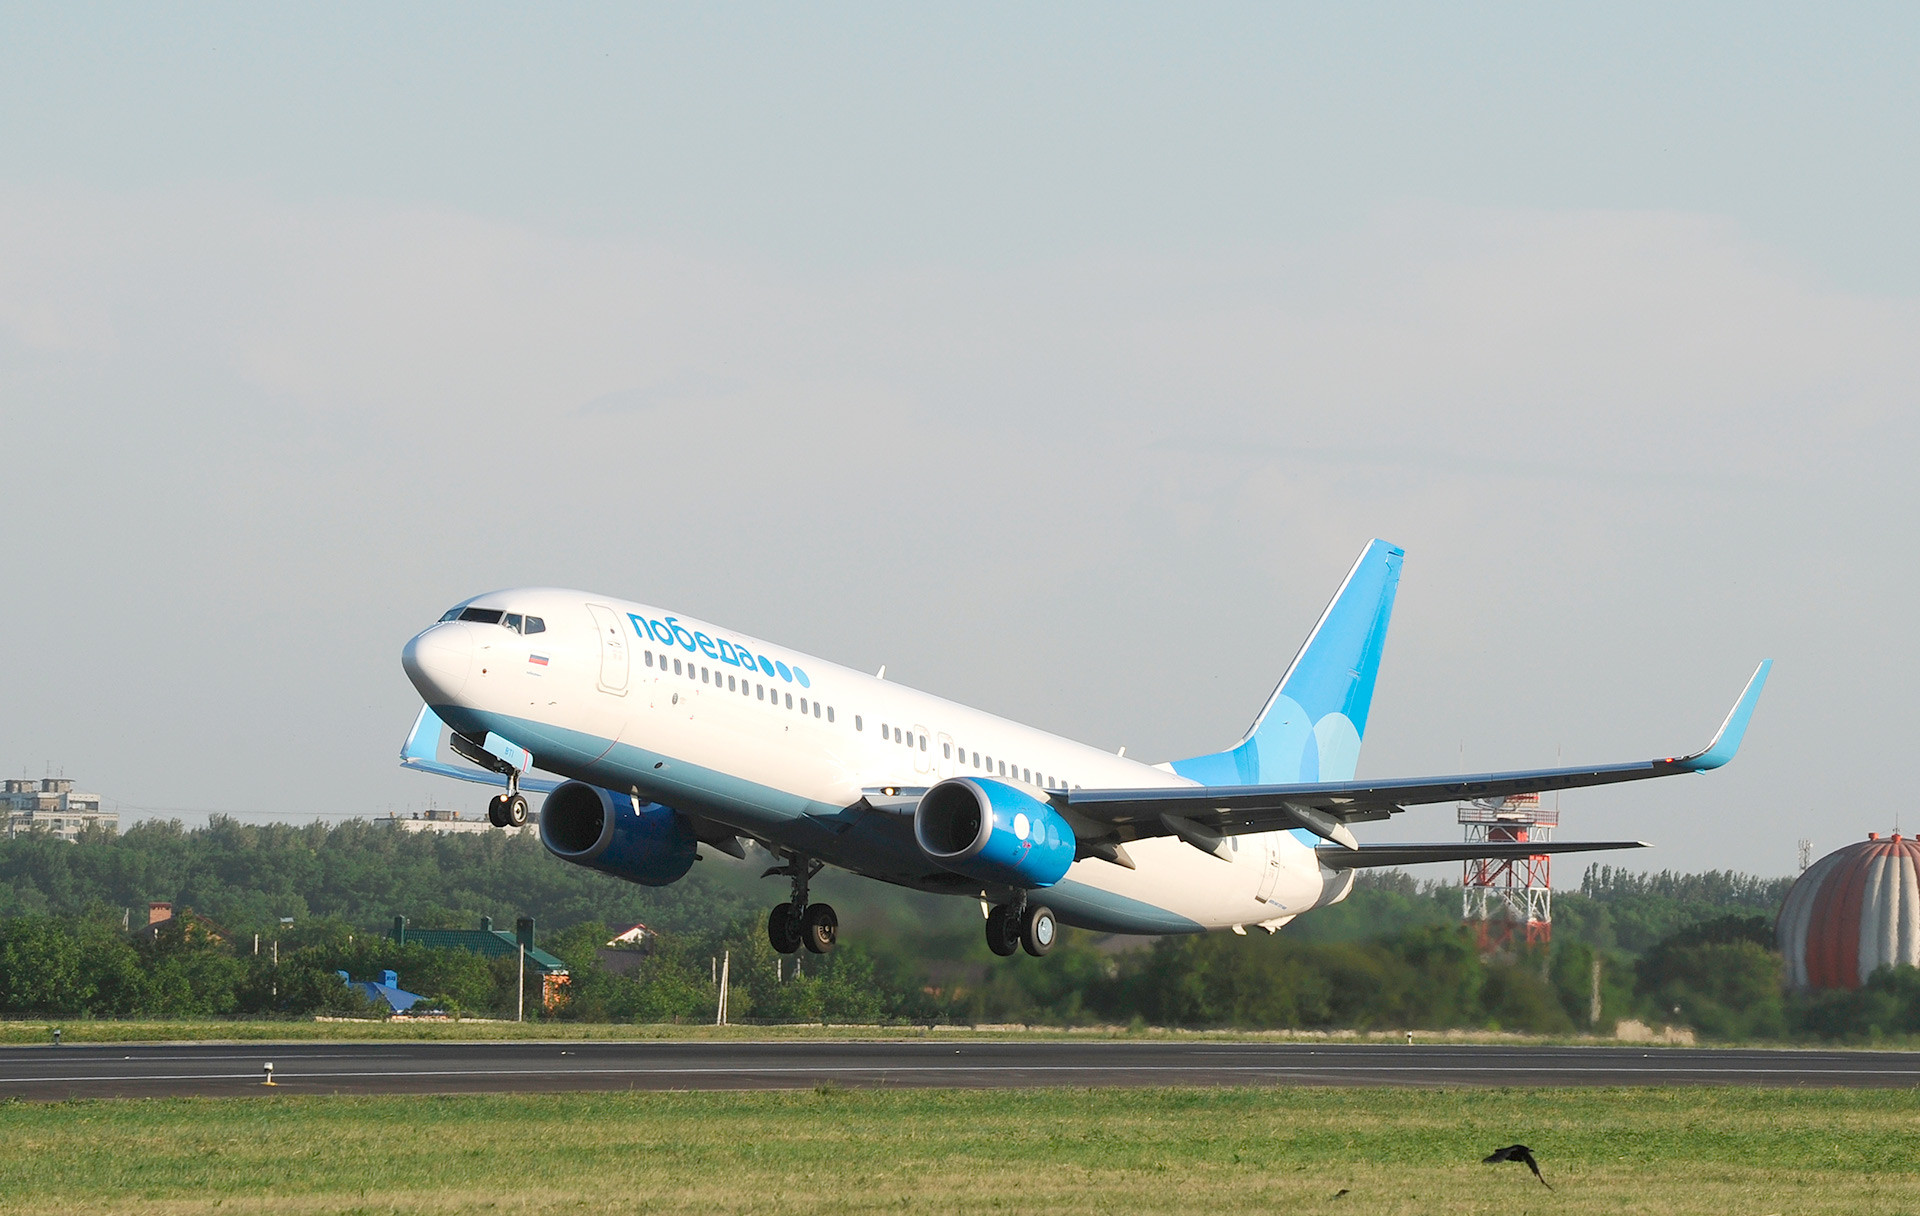 Russia has just one low-cost air carrier serving domestic routes - Pobeda.